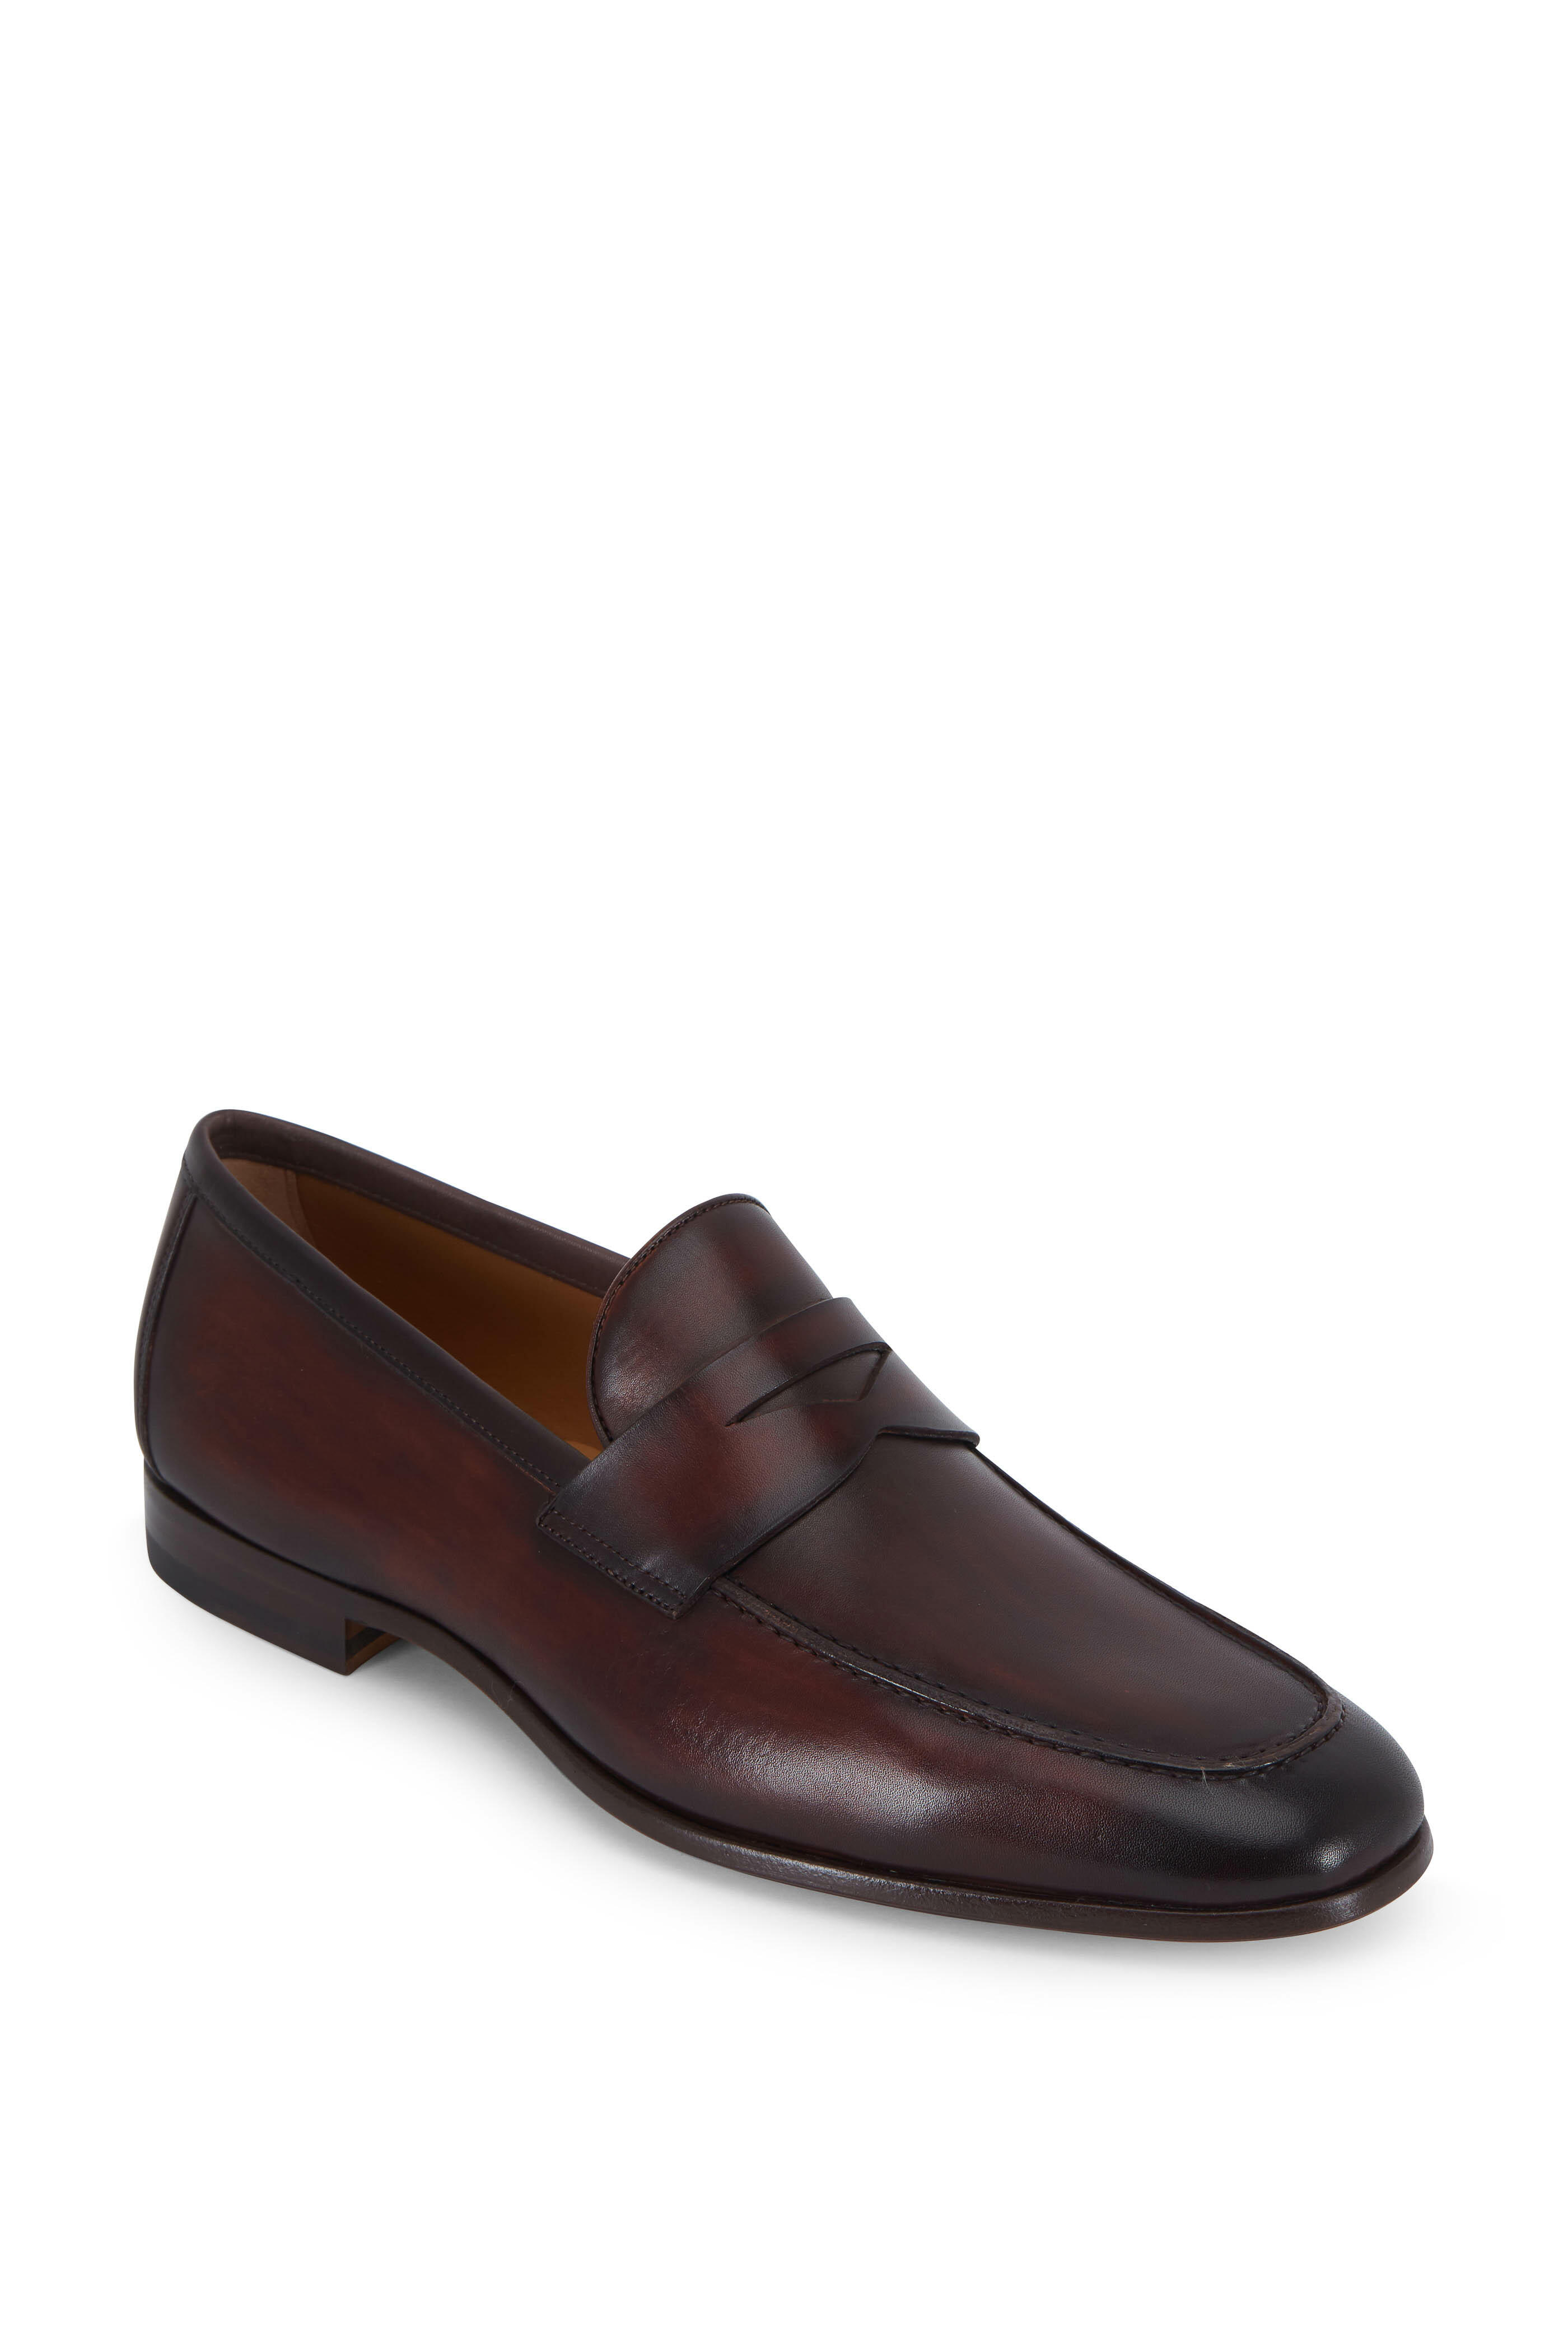 Magnanni - Reed Mid Brown Burnished Leather Penny